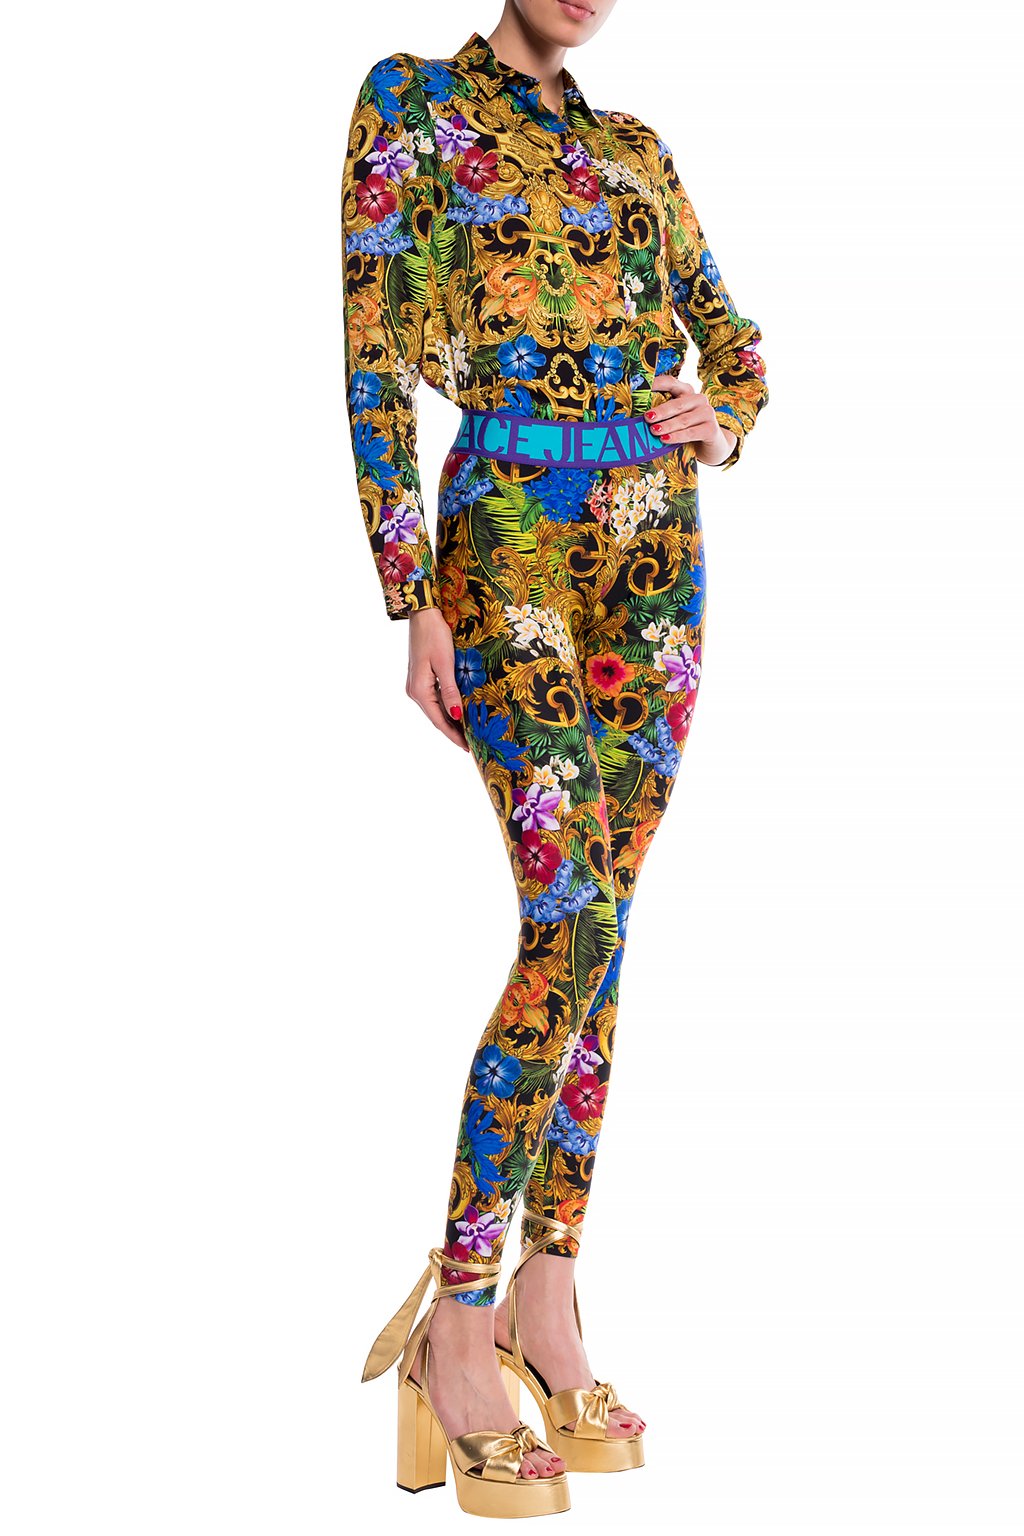 Versace Jeans Couture Printed Leggings